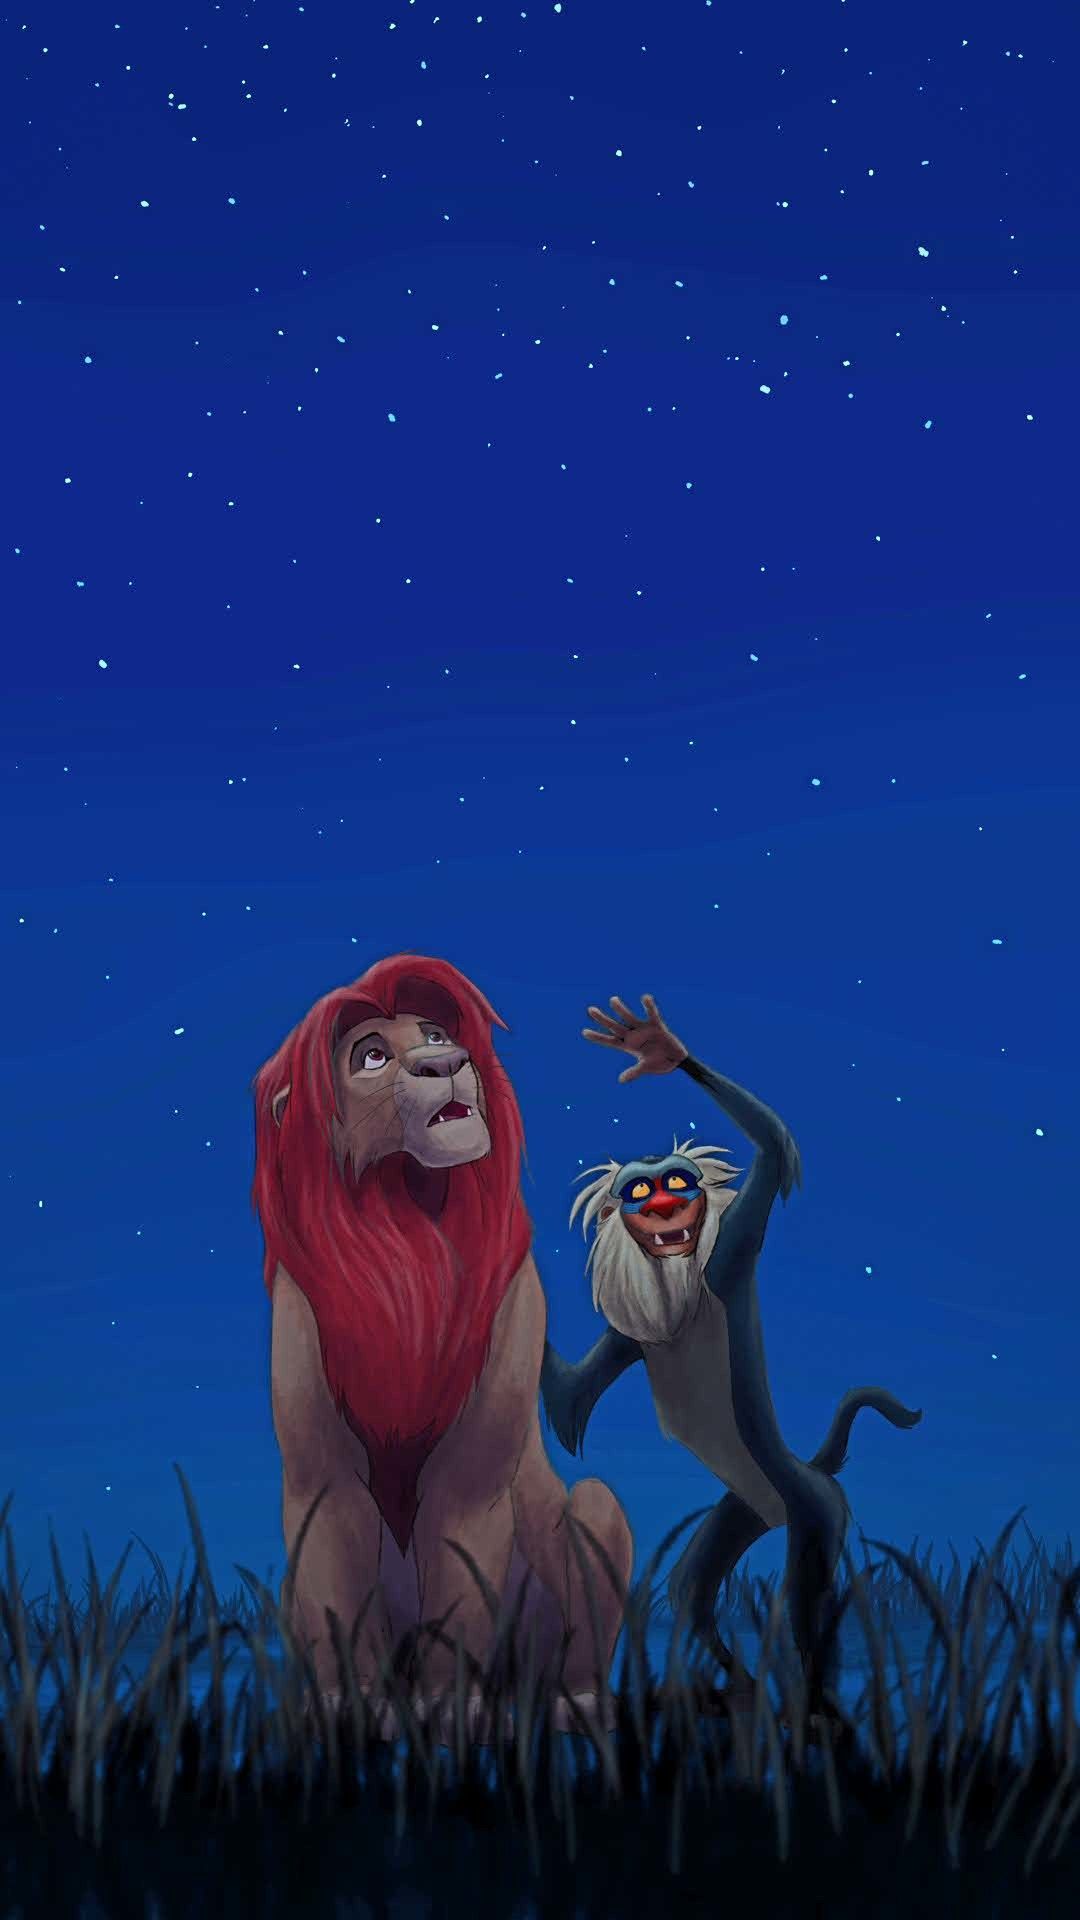 The lion and hyena are standing in a field underneath stars - The Lion King, lion